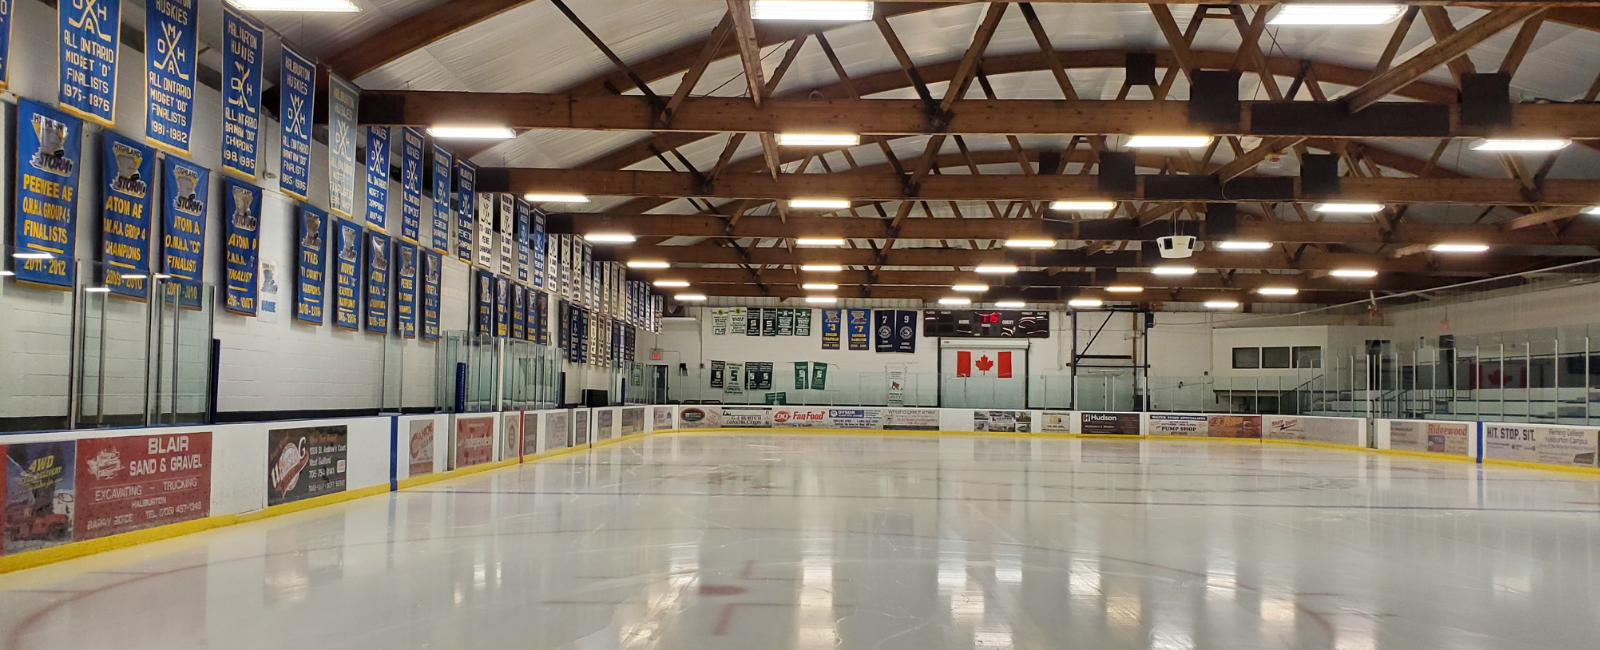 View of arena ice pad.